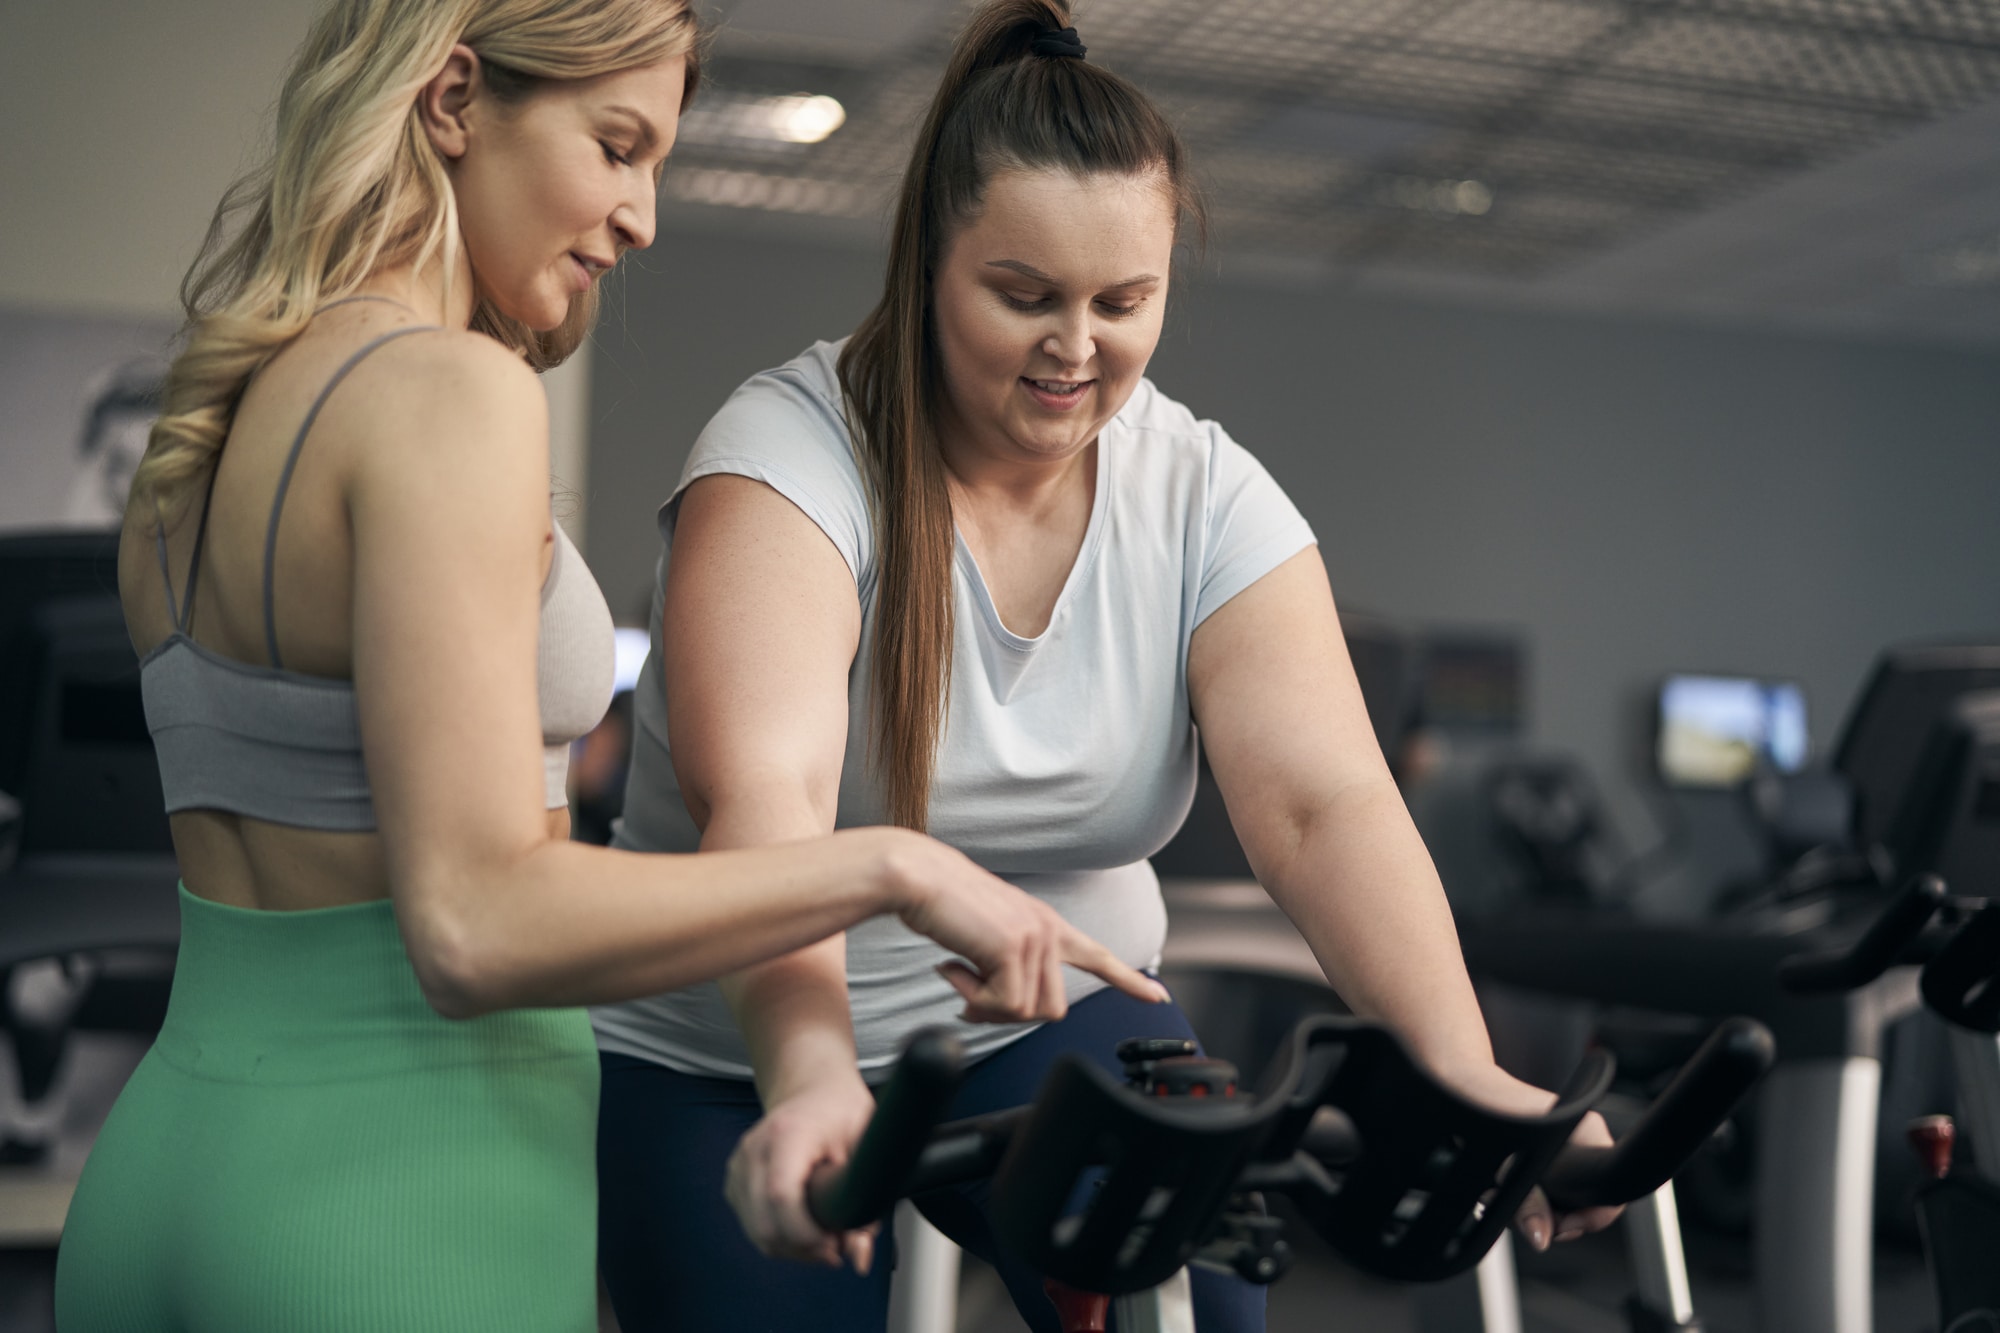 Instructor helping plus size woman on a stationary bike at the gym.